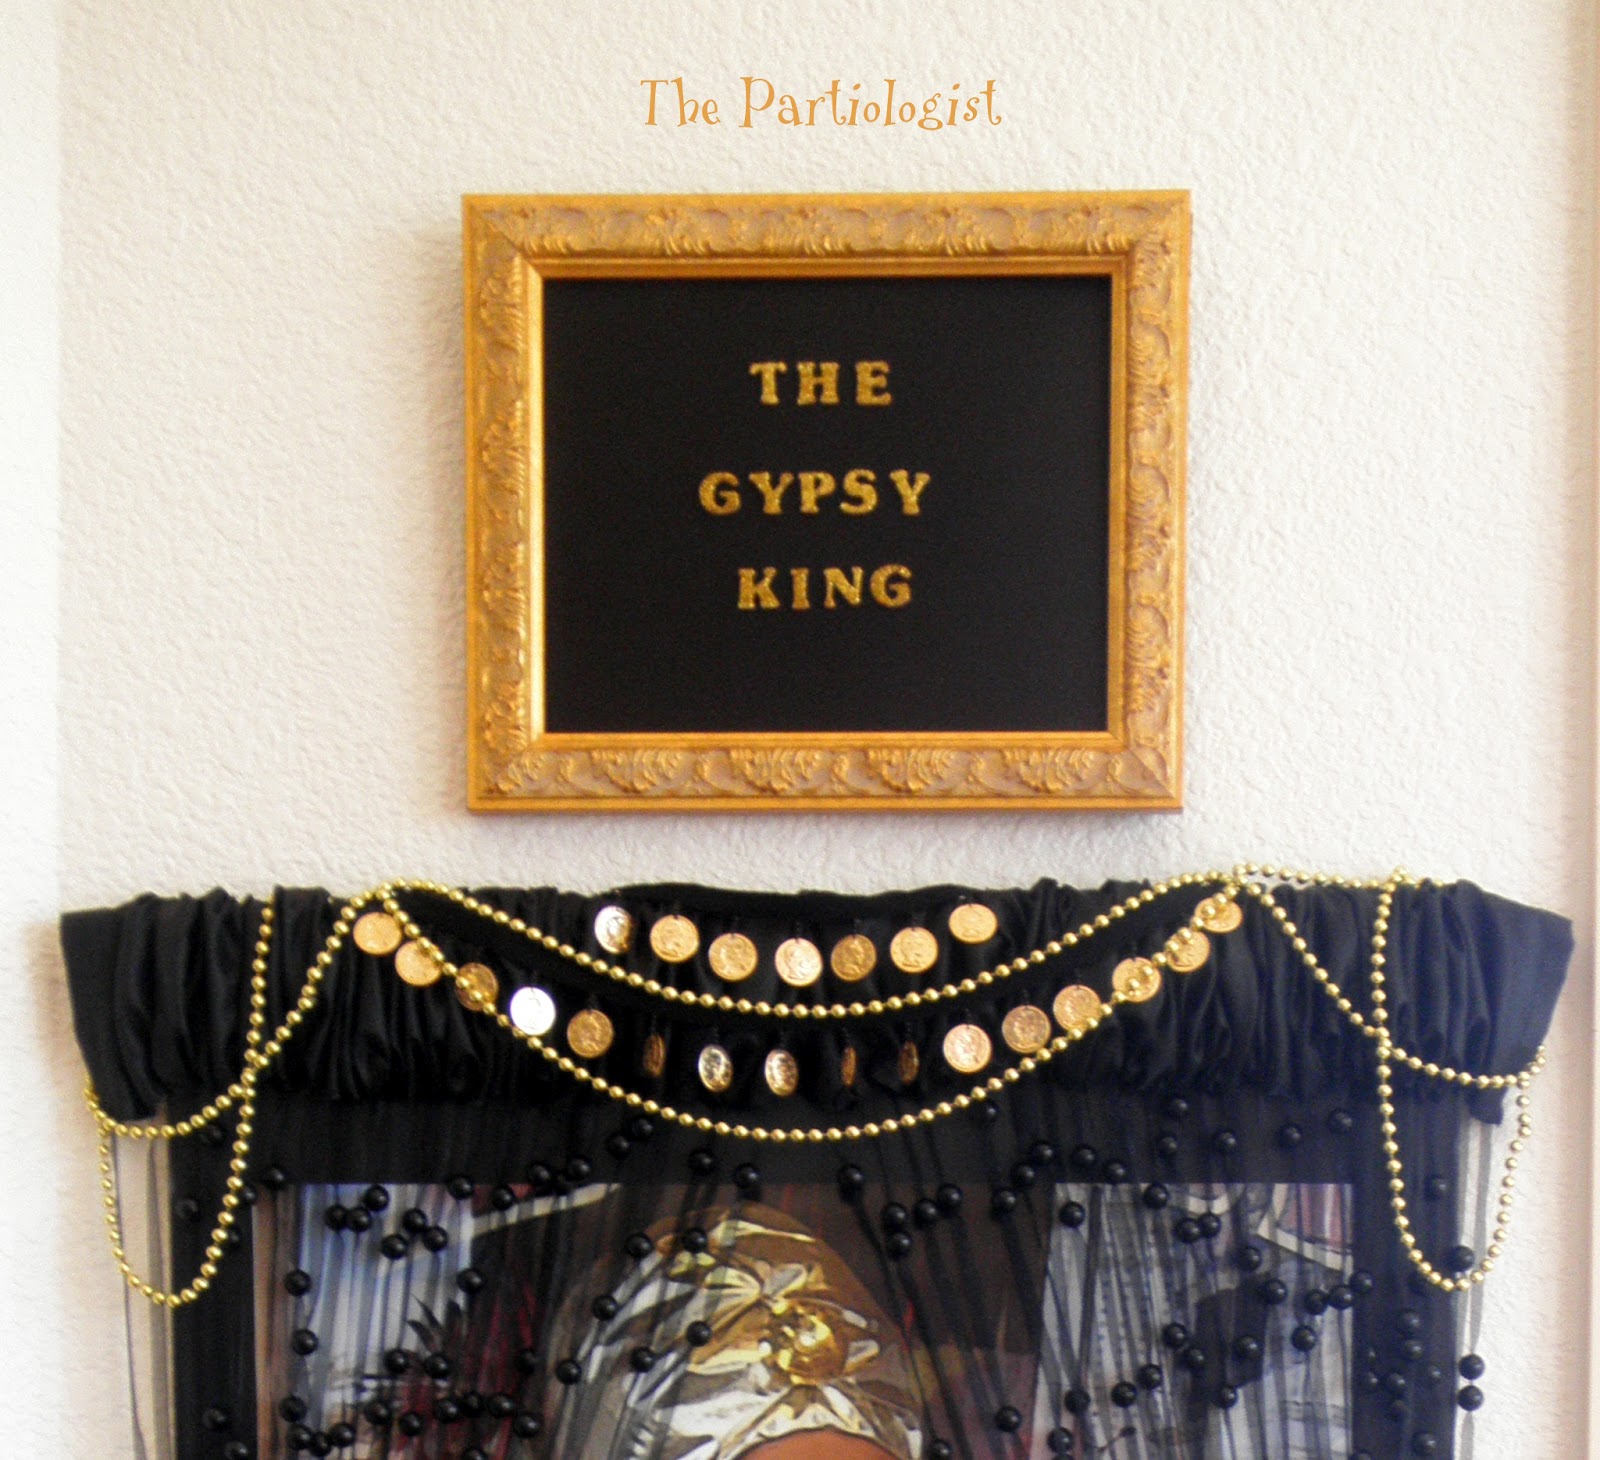 The Partiologist: The Gypsy King!